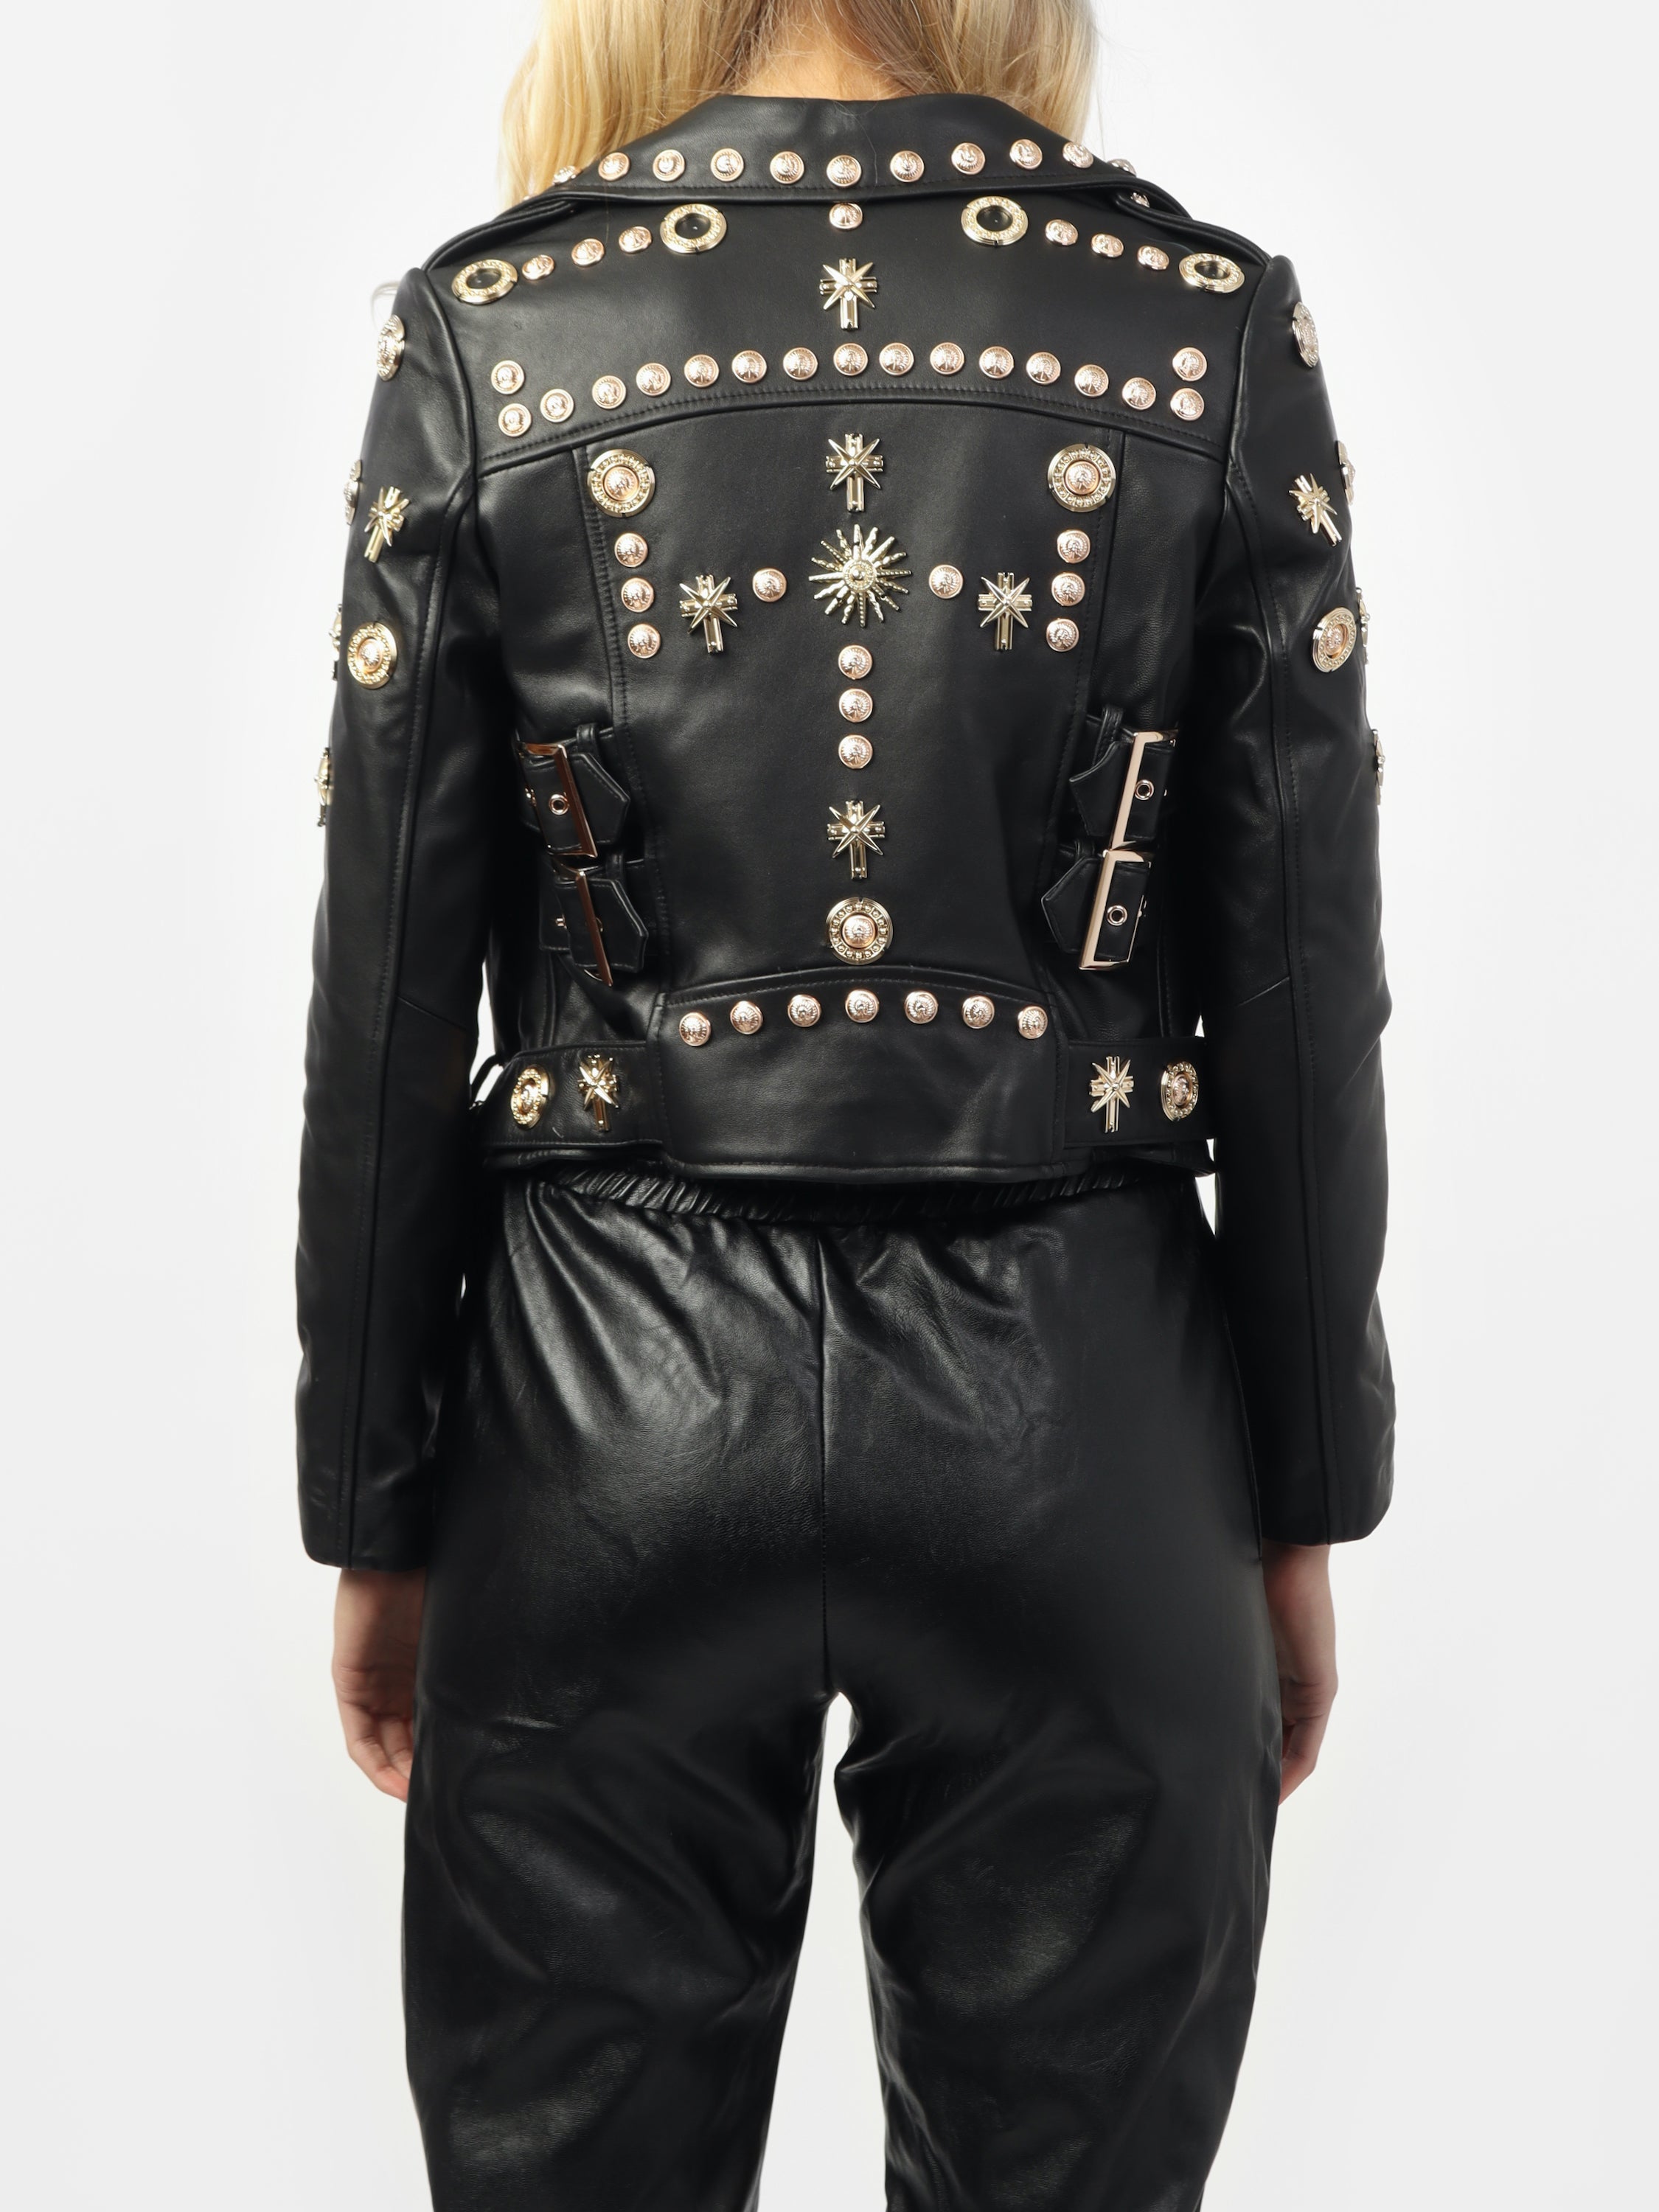 Darcey's Gold Studded Leather Jacket